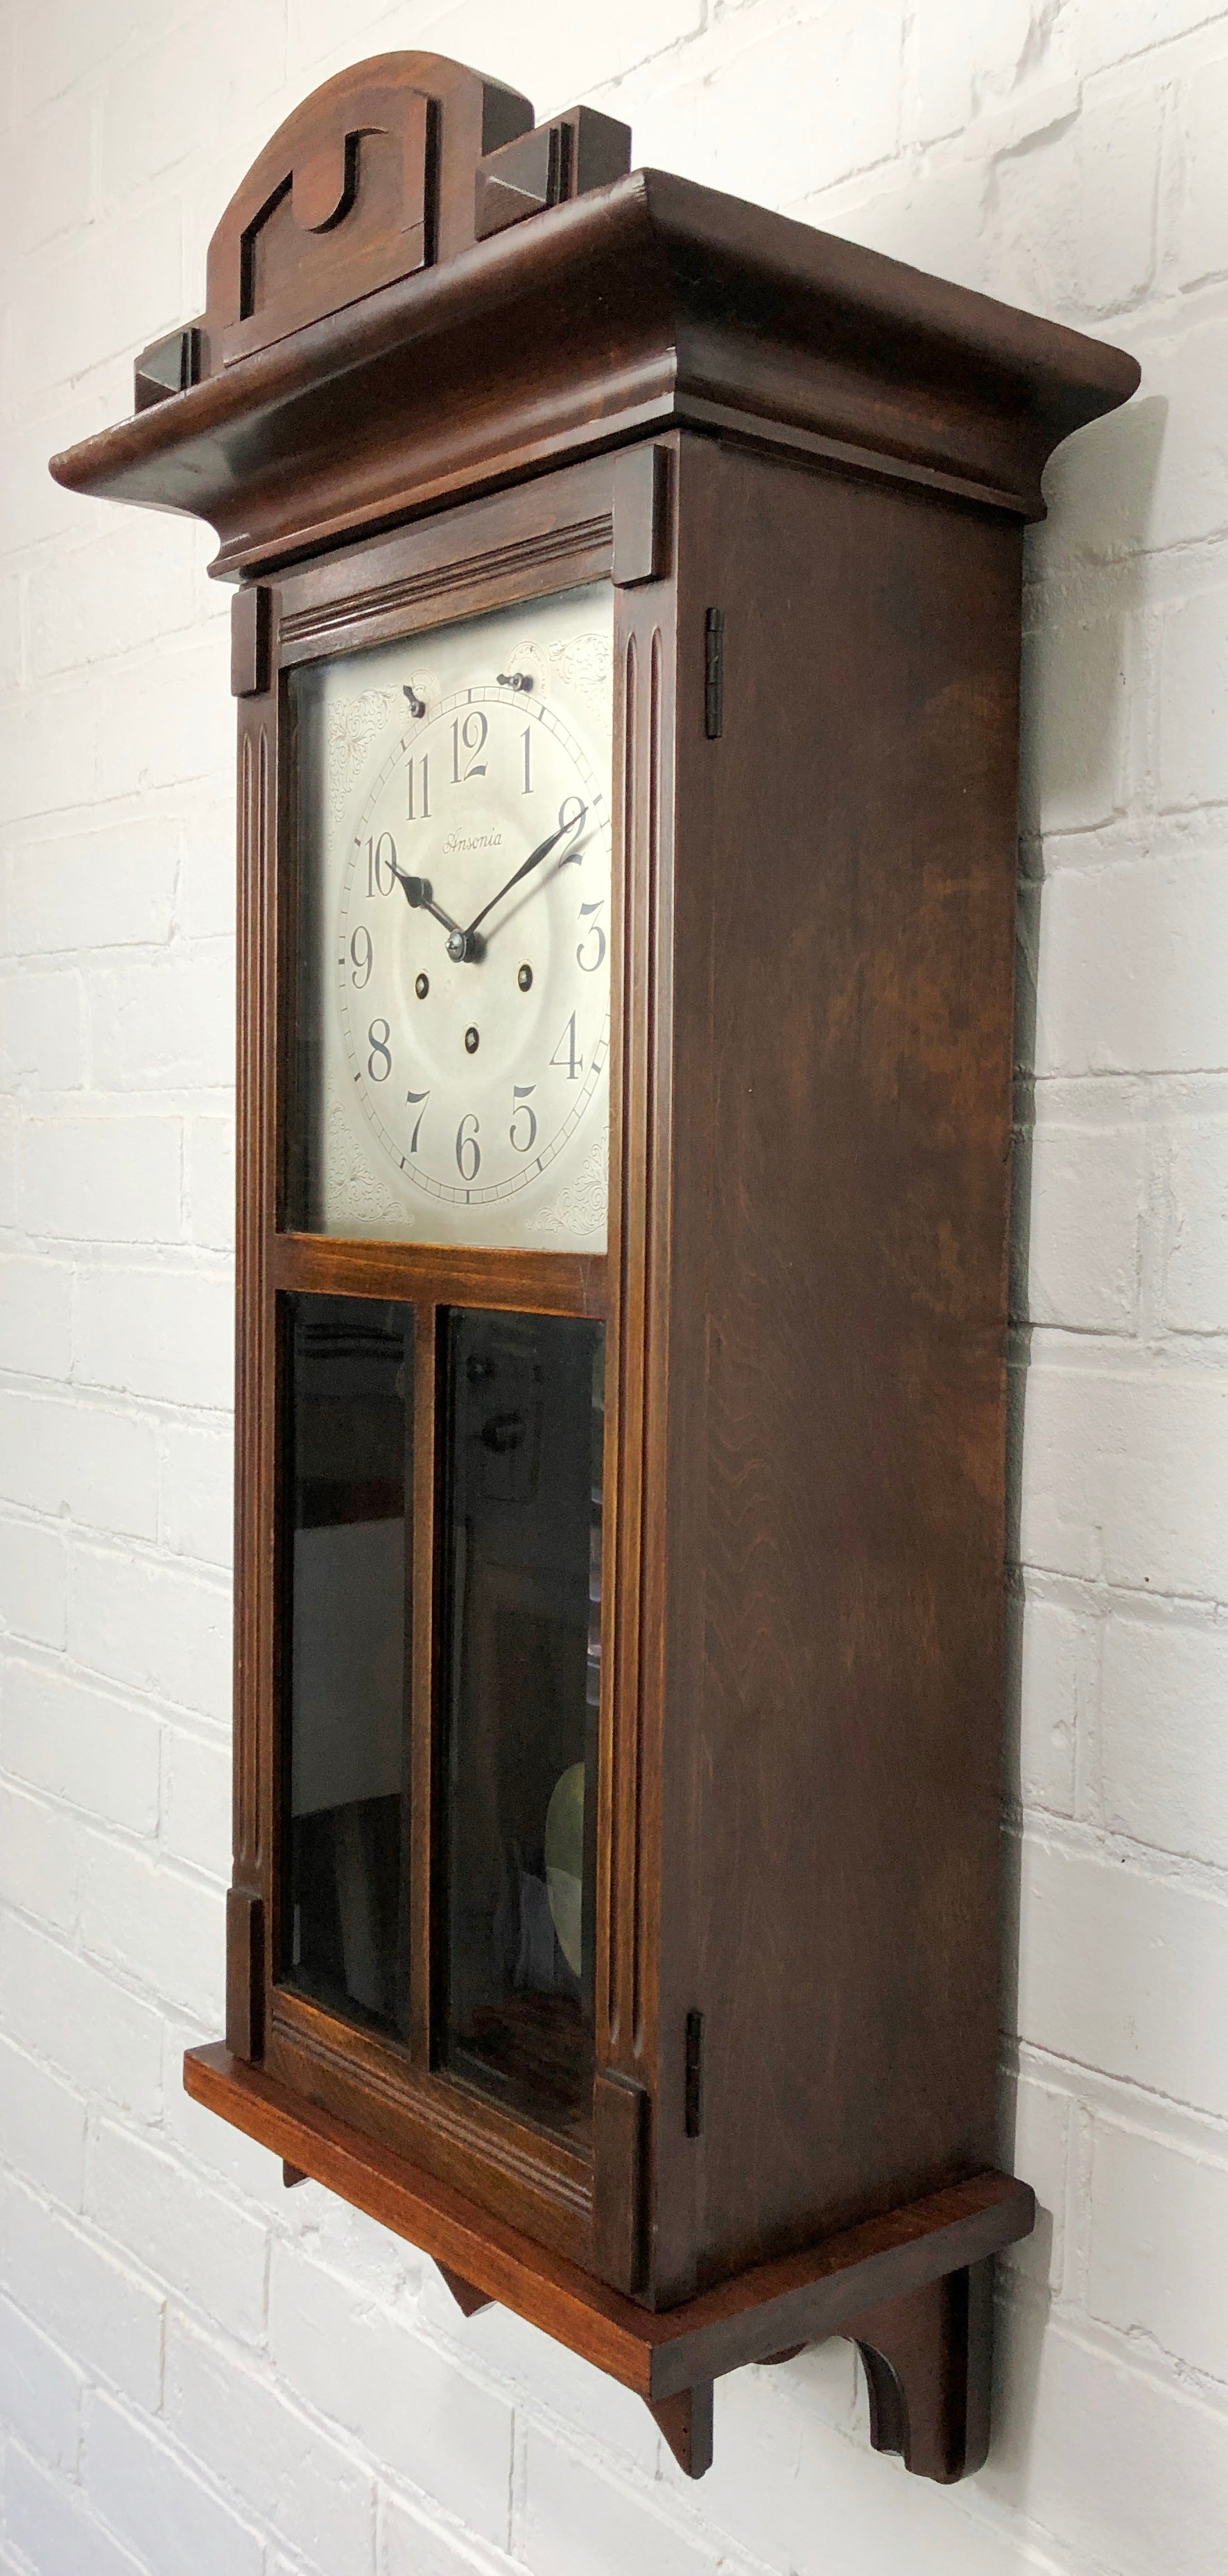 Antique ANSONIA Westminster Wall Clock eXibit collection